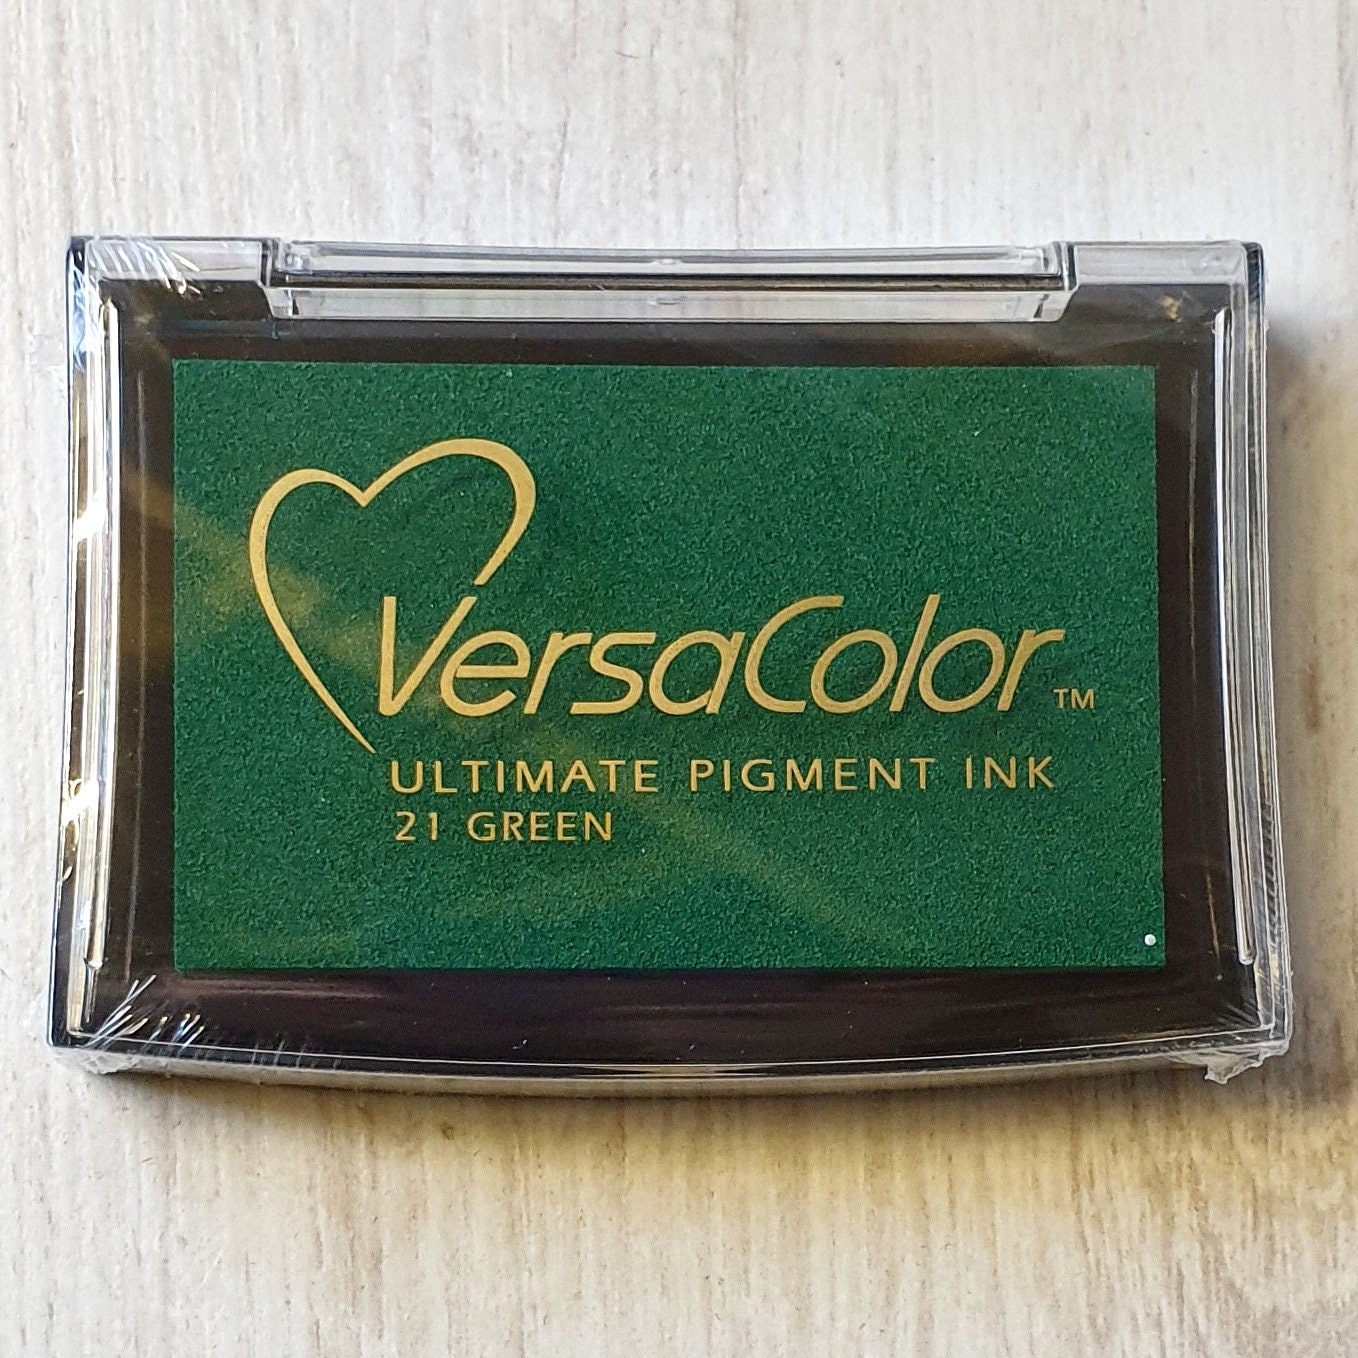 Versacolor Pigment Ink Pad Small in Black Black Inkpad Ink for